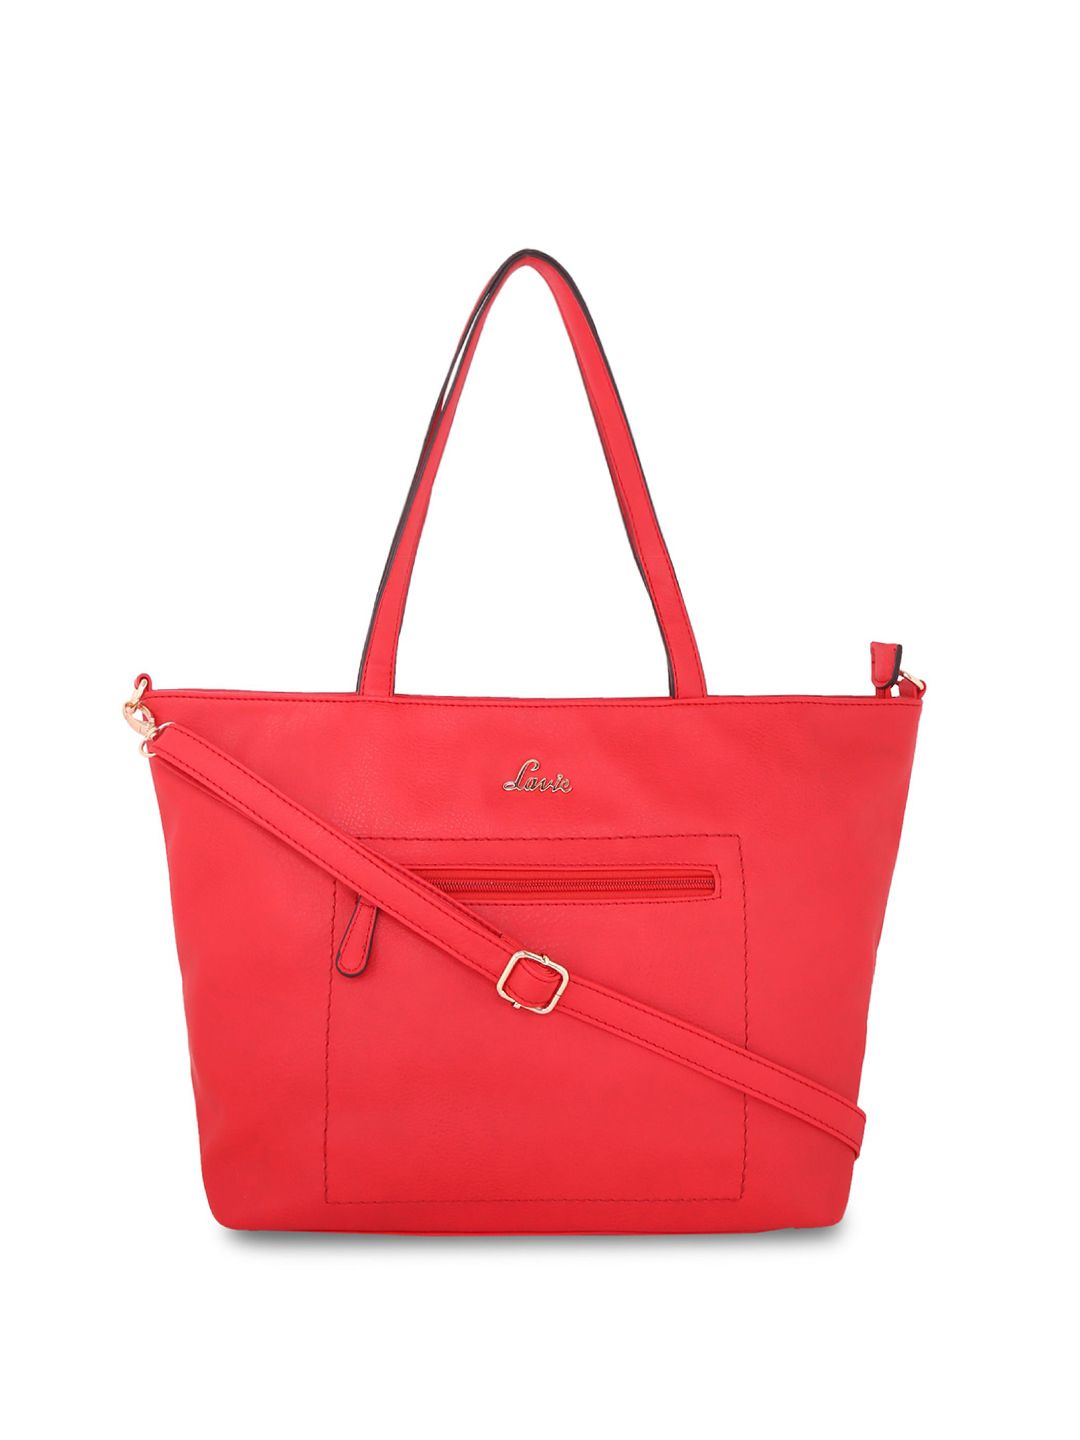 Lavie Coral PU Structured Shoulder Bag Price in India